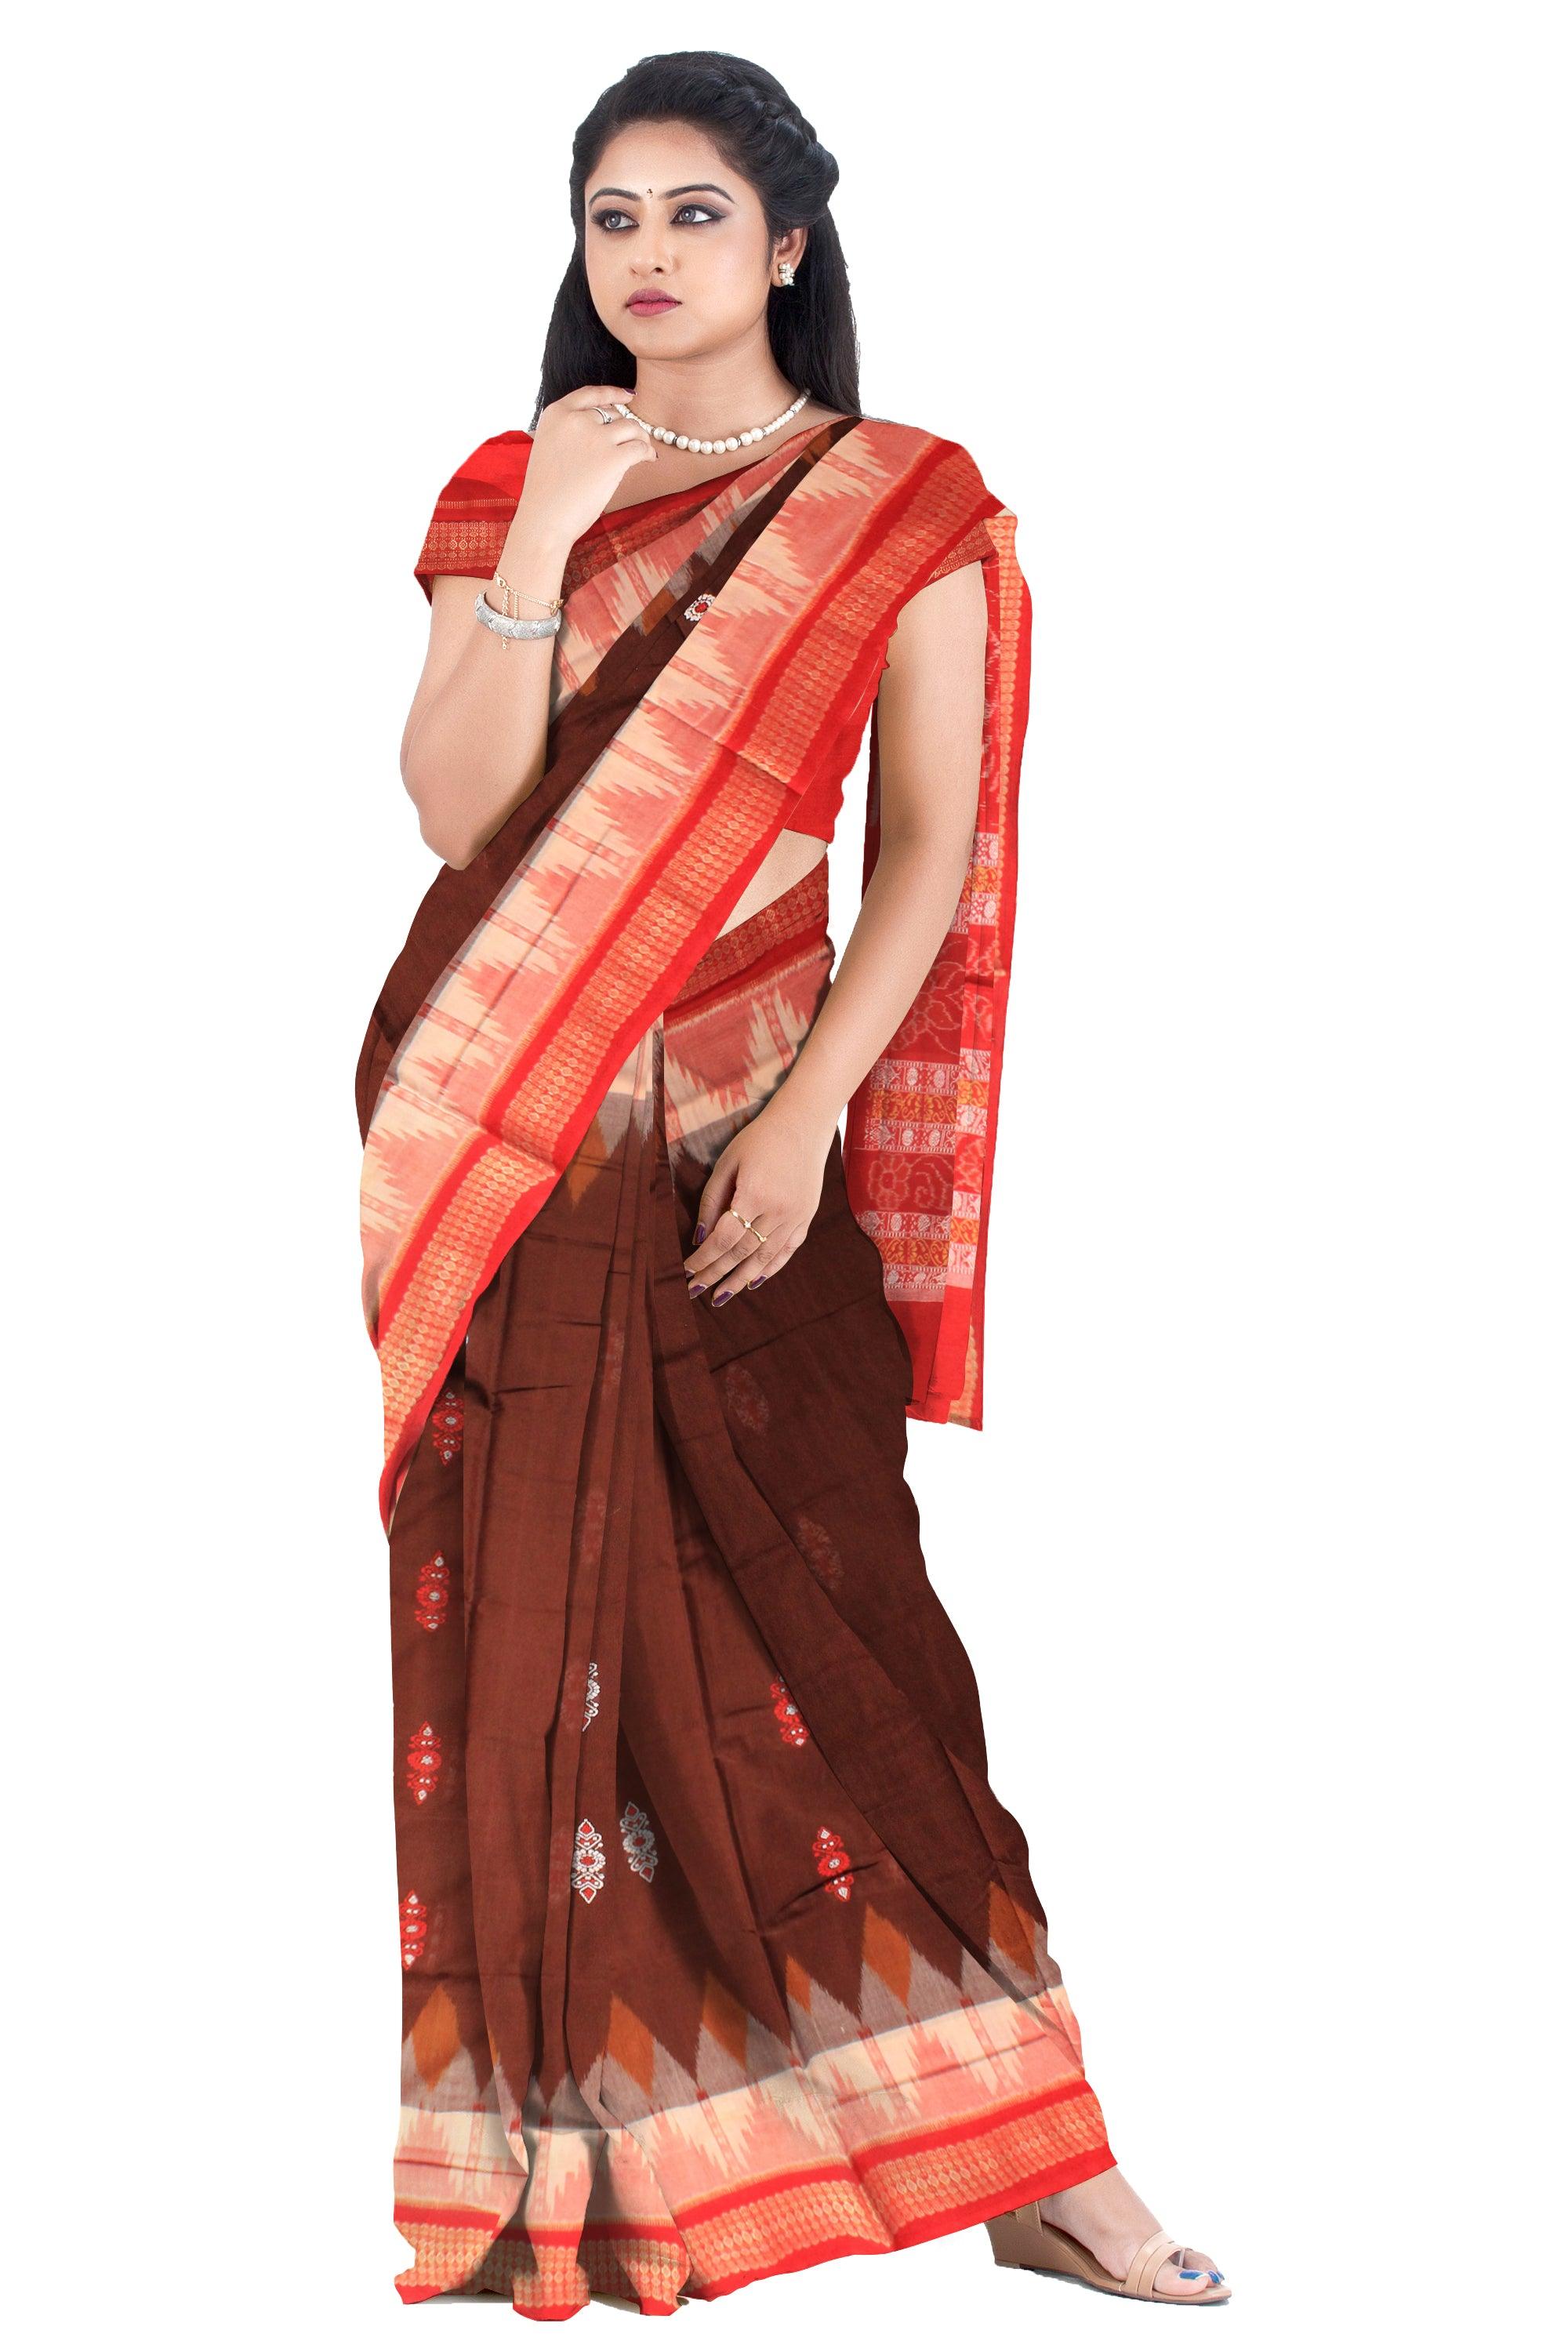 COTTON SAREE WITH FLORA PRINT IN BROWN AND RED AVAILABLE WITH BLOUSE PIECE - Koshali Arts & Crafts Enterprise